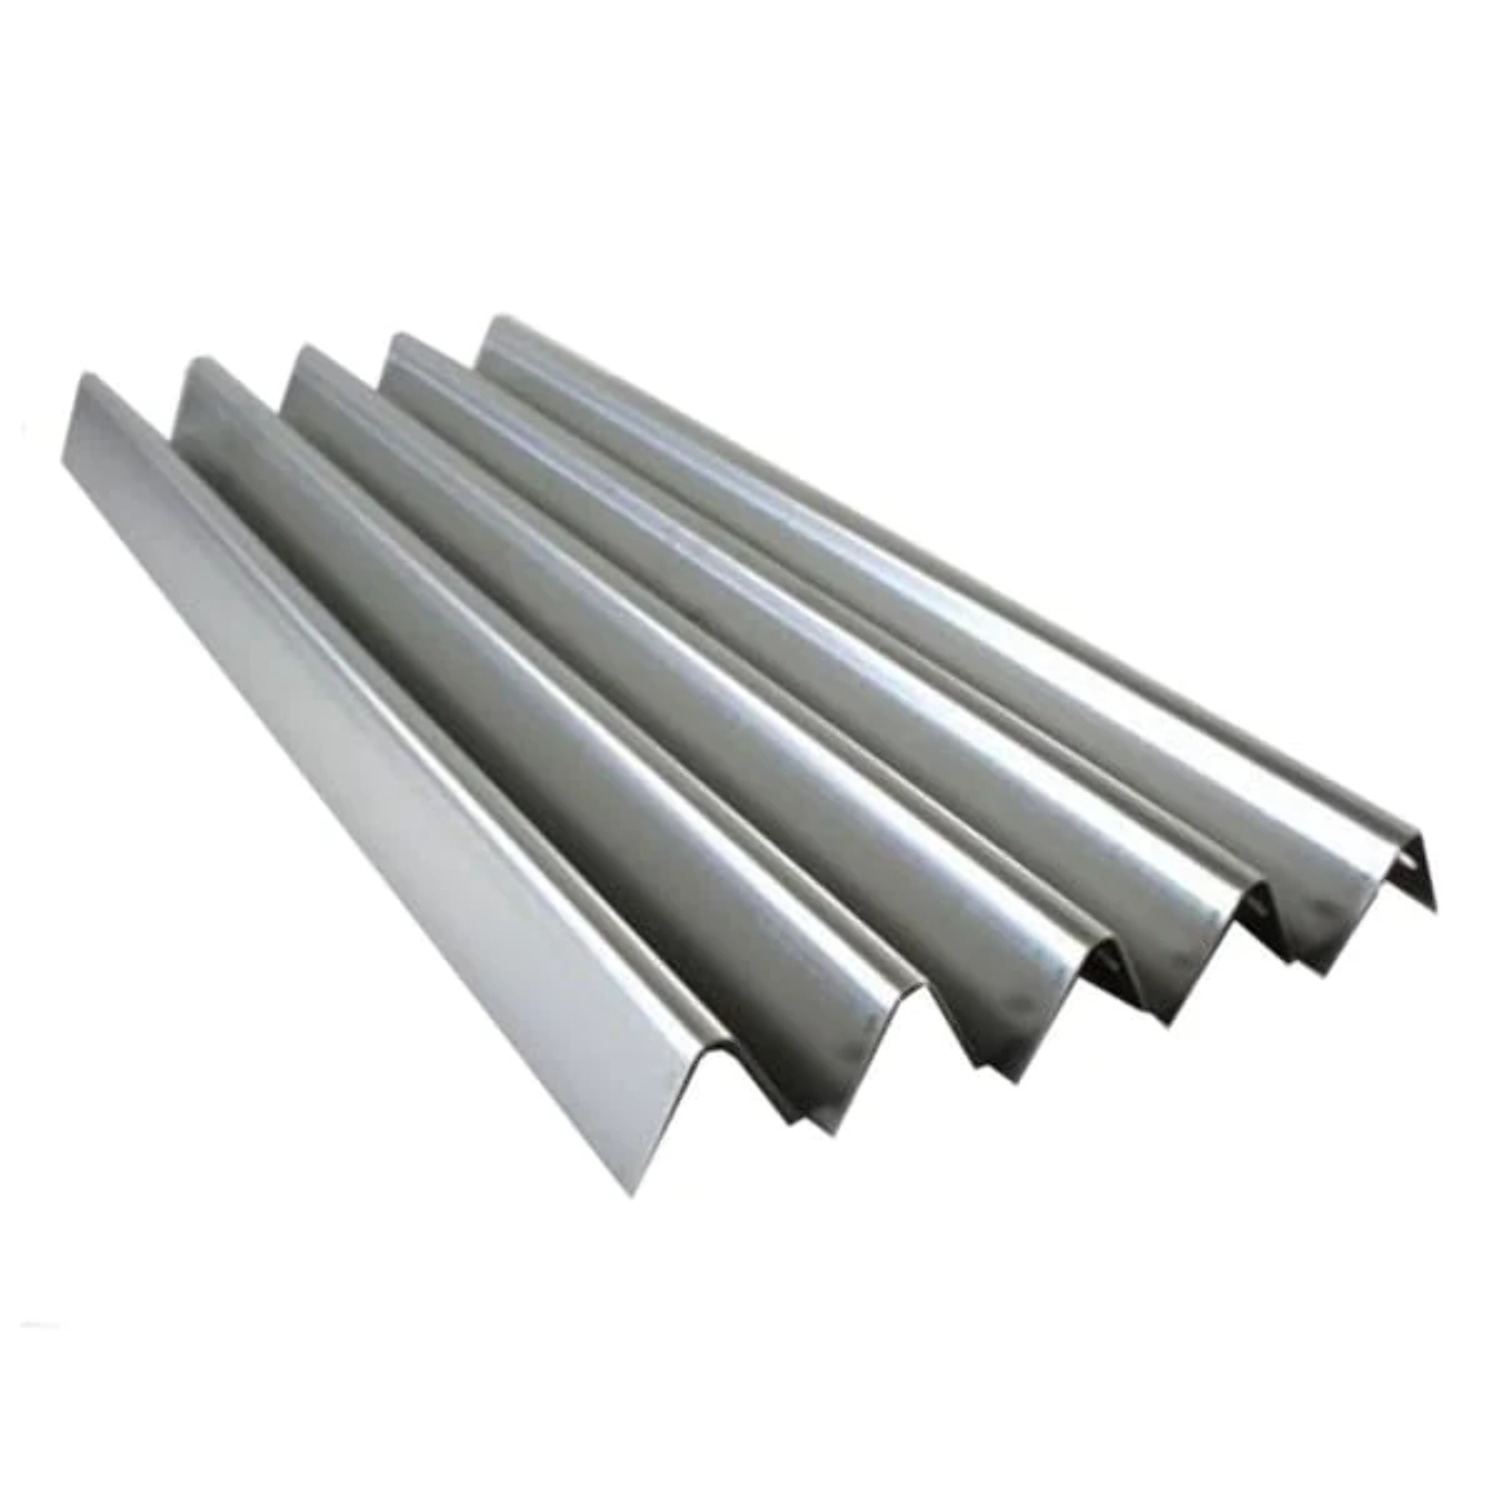 BBQ Grill Compatible With Weber Grills Heat Plate 5-Pack SS Flavorizer Bar Set 22 1/2 Long BCP65903 - image 2 of 3